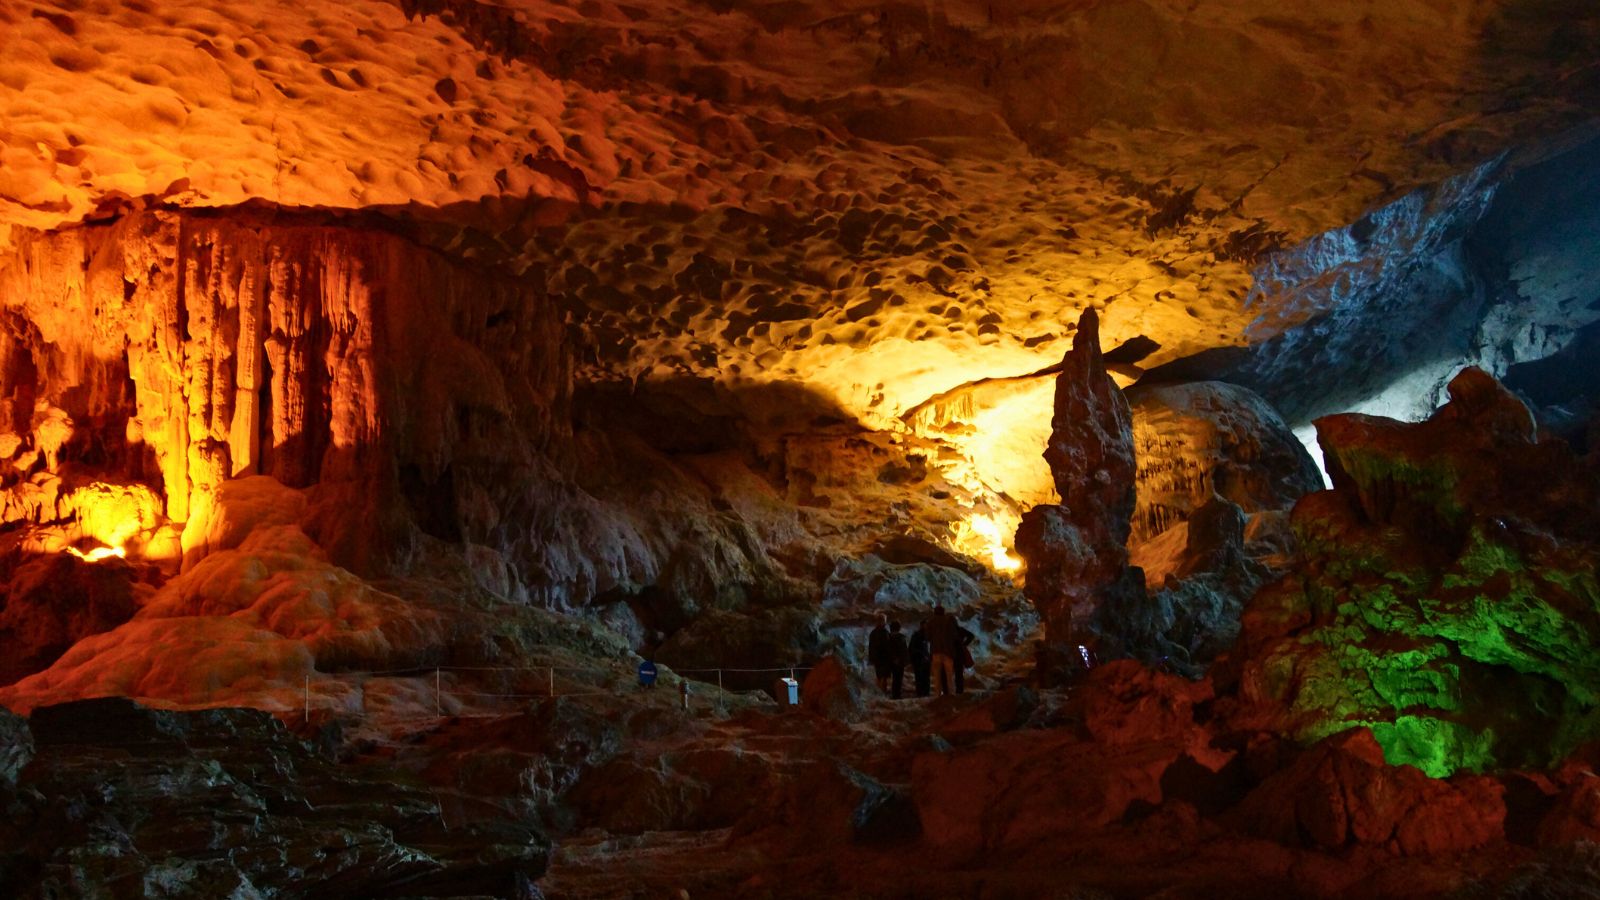 Anytime will be perfect for exploring Sung Sot Cave in a year